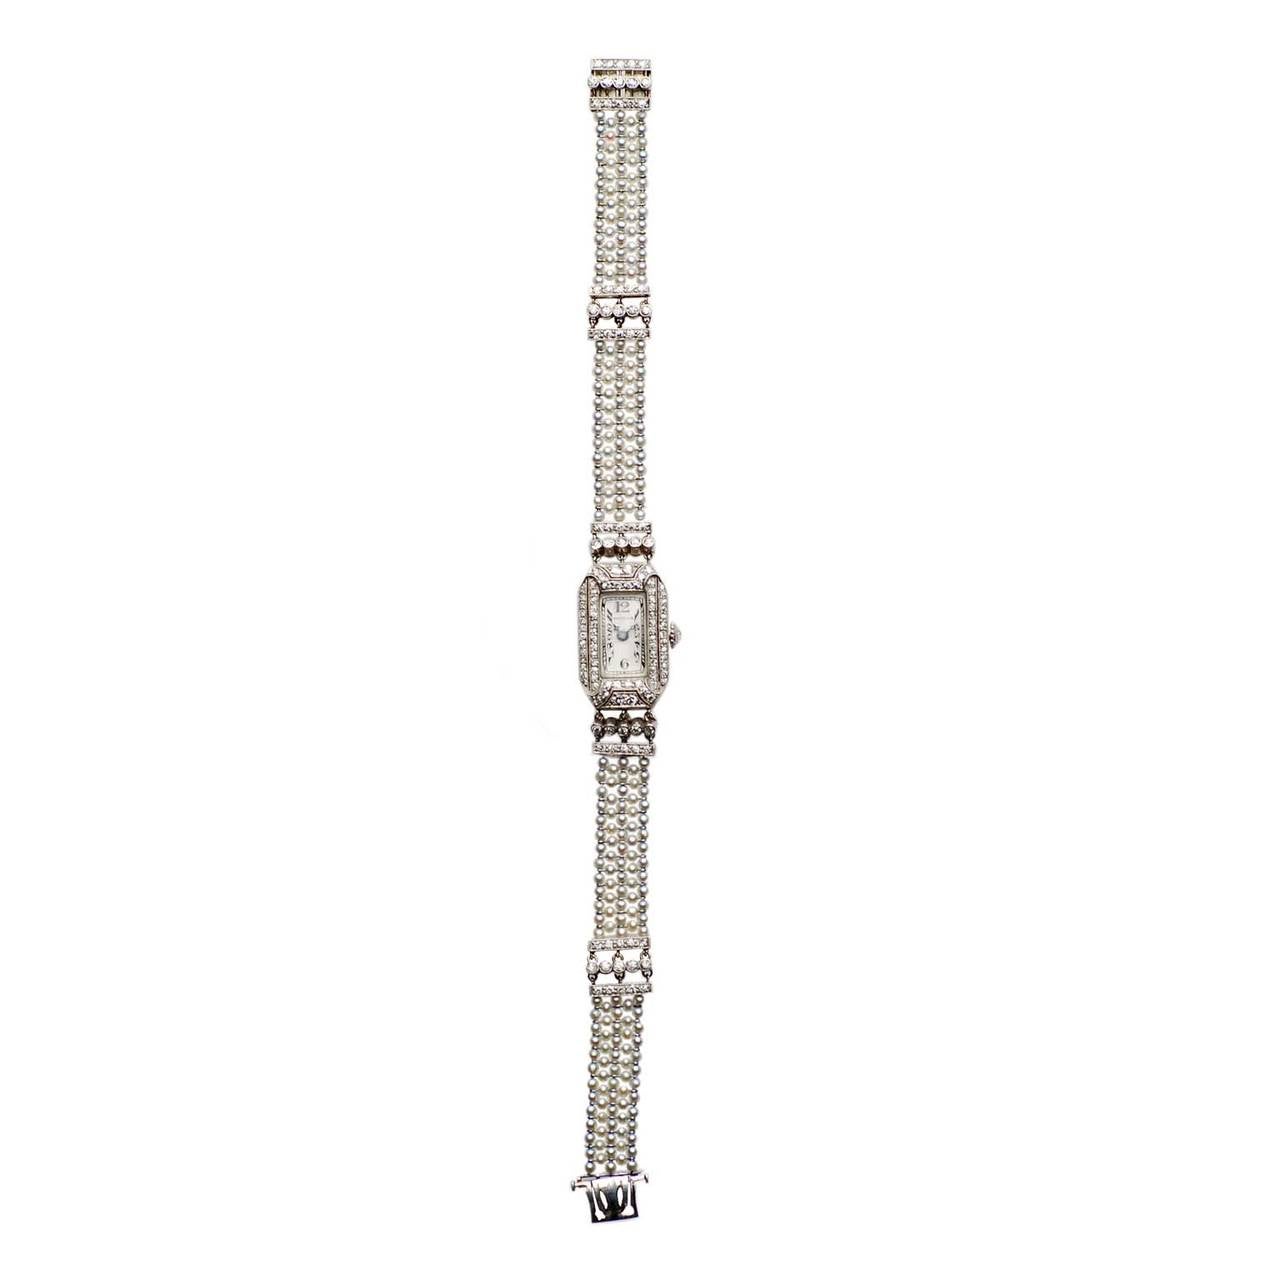 Marcus & Co., Belle époque Watch set in Platinum with Natural Pearls and diamonds.